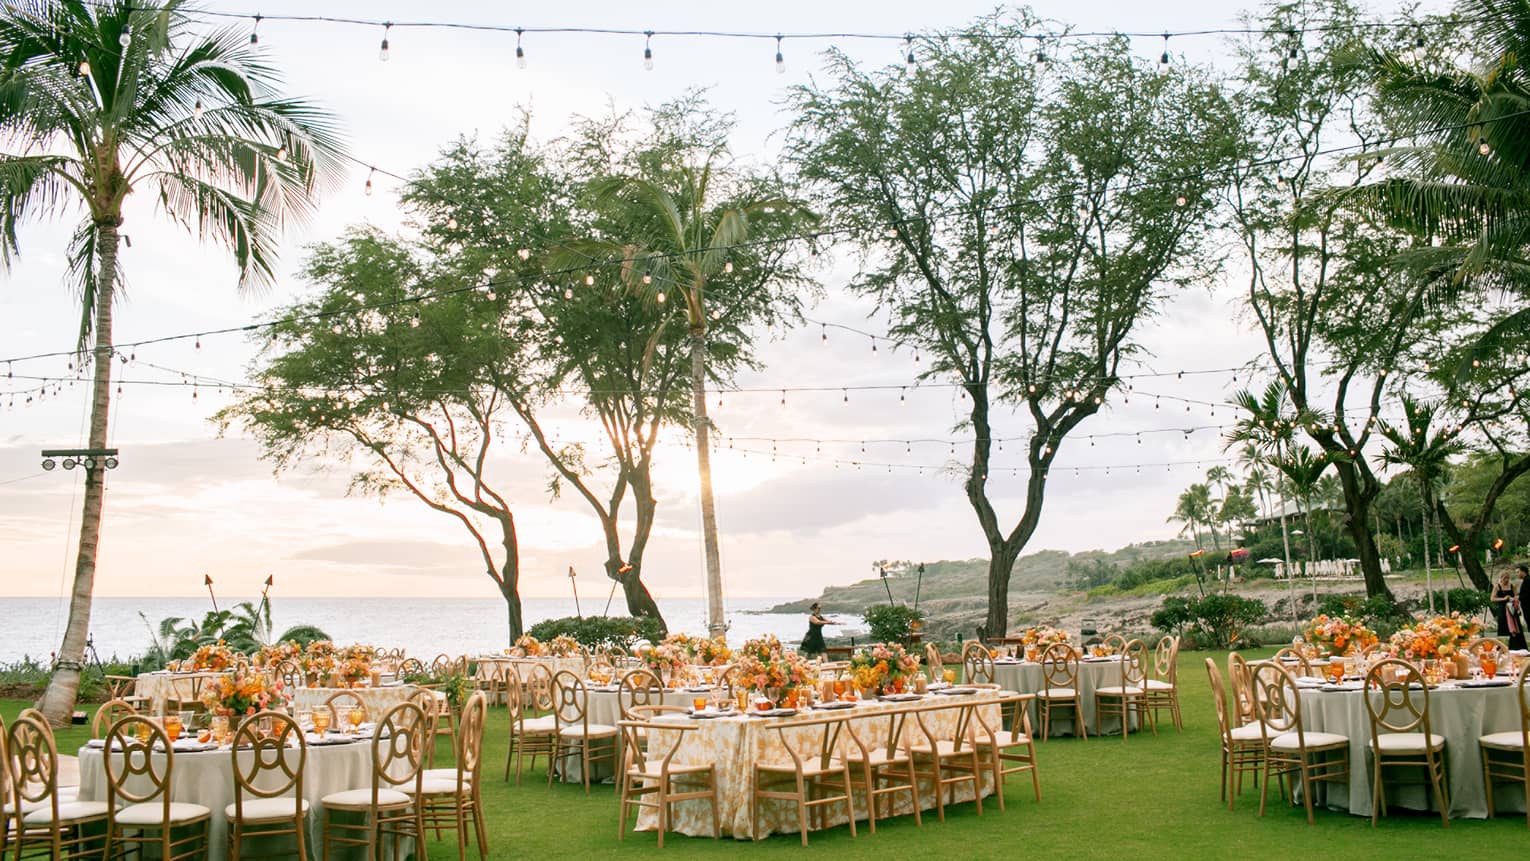 A group of long tables decorated for a wedding on green grass with tall, thin, trees surrounding them.